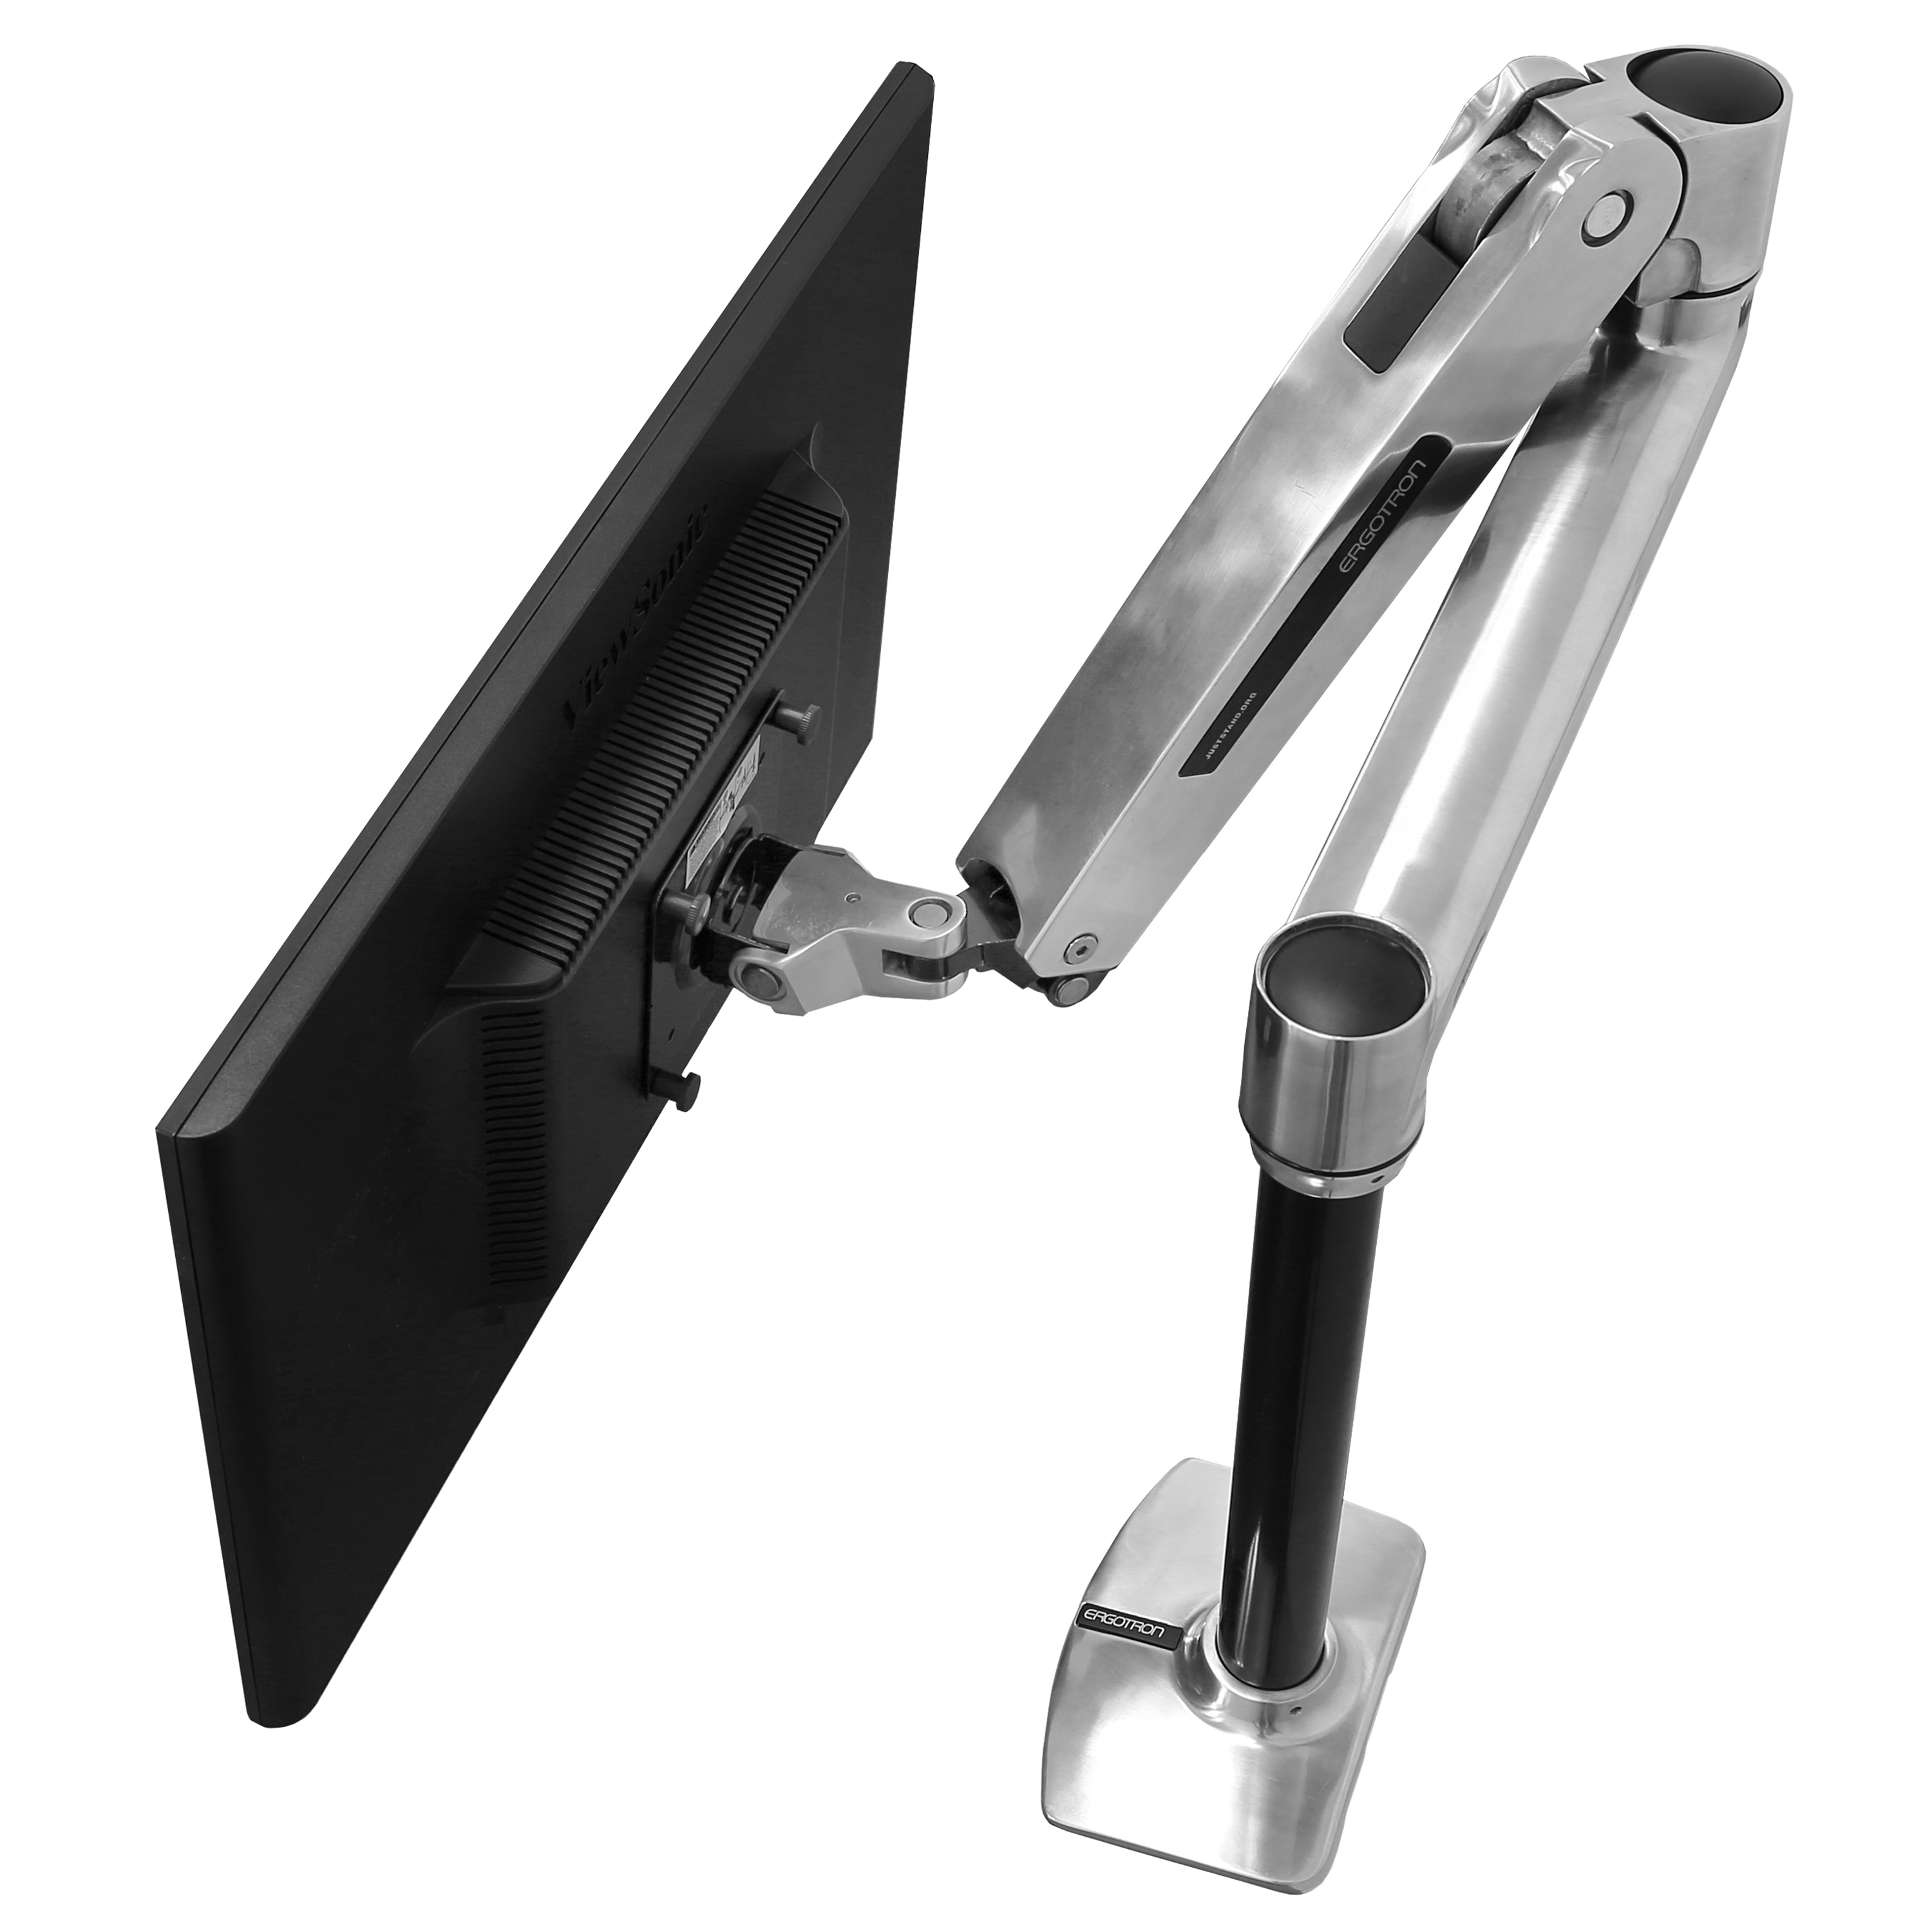 Ergotron LX Monitor Arm – Chairlines